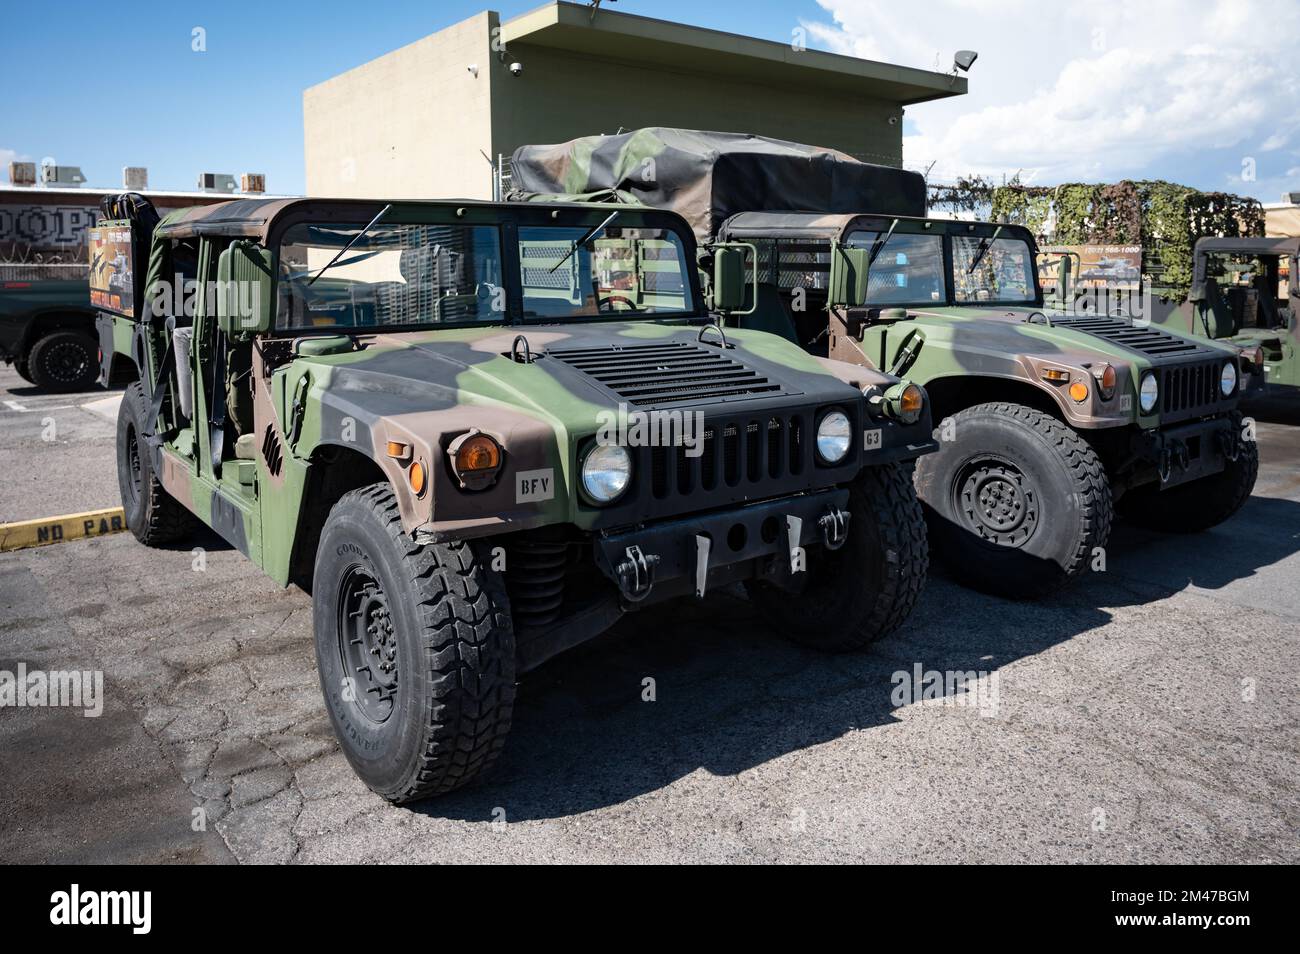 Detail of a Humvee in a military base of the United States of North America Stock Photo